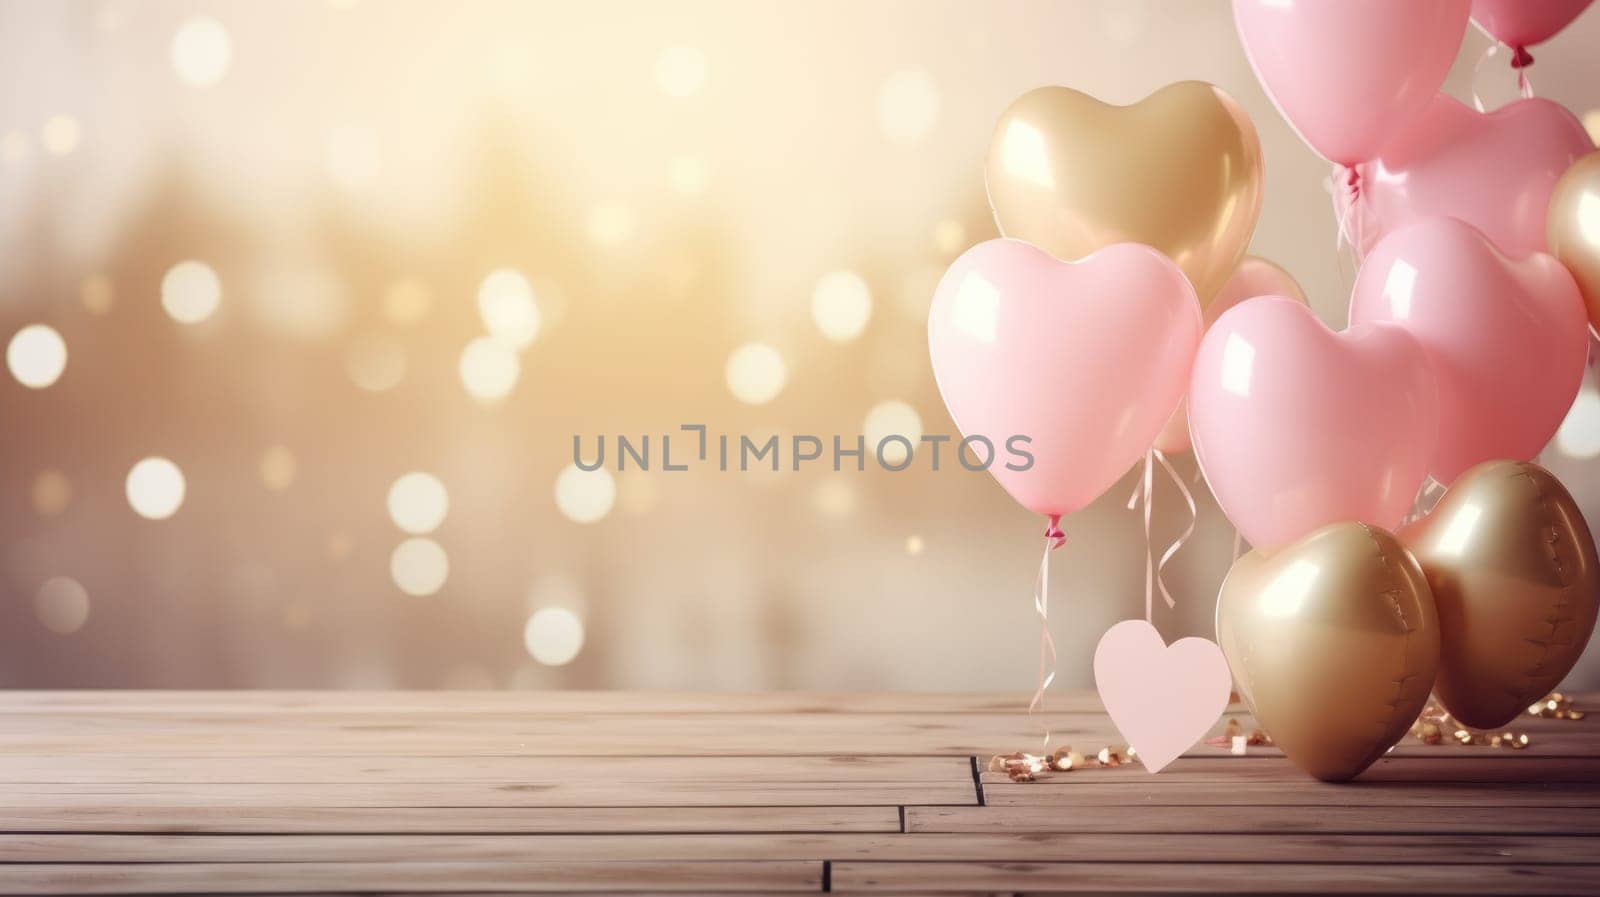 White wooden table in foreground. Blurred background with pink and gold heart-shaped balloons AI